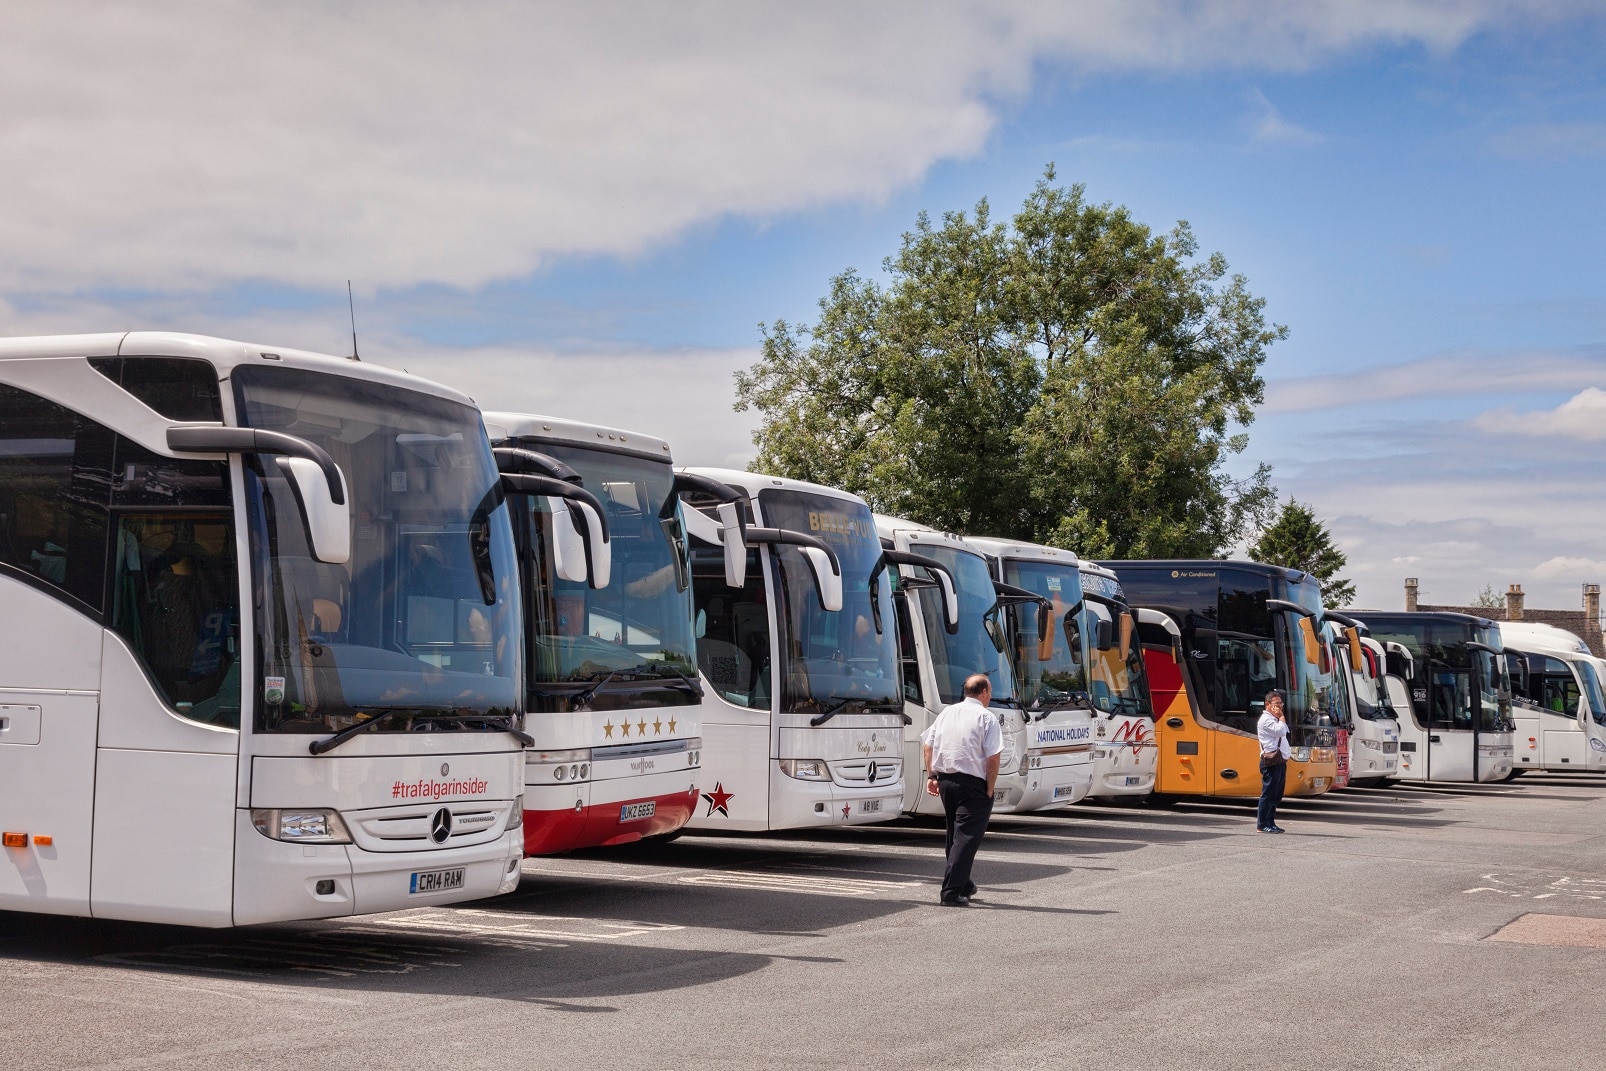 Coach and bus industry trade bodies will be important post-COVID